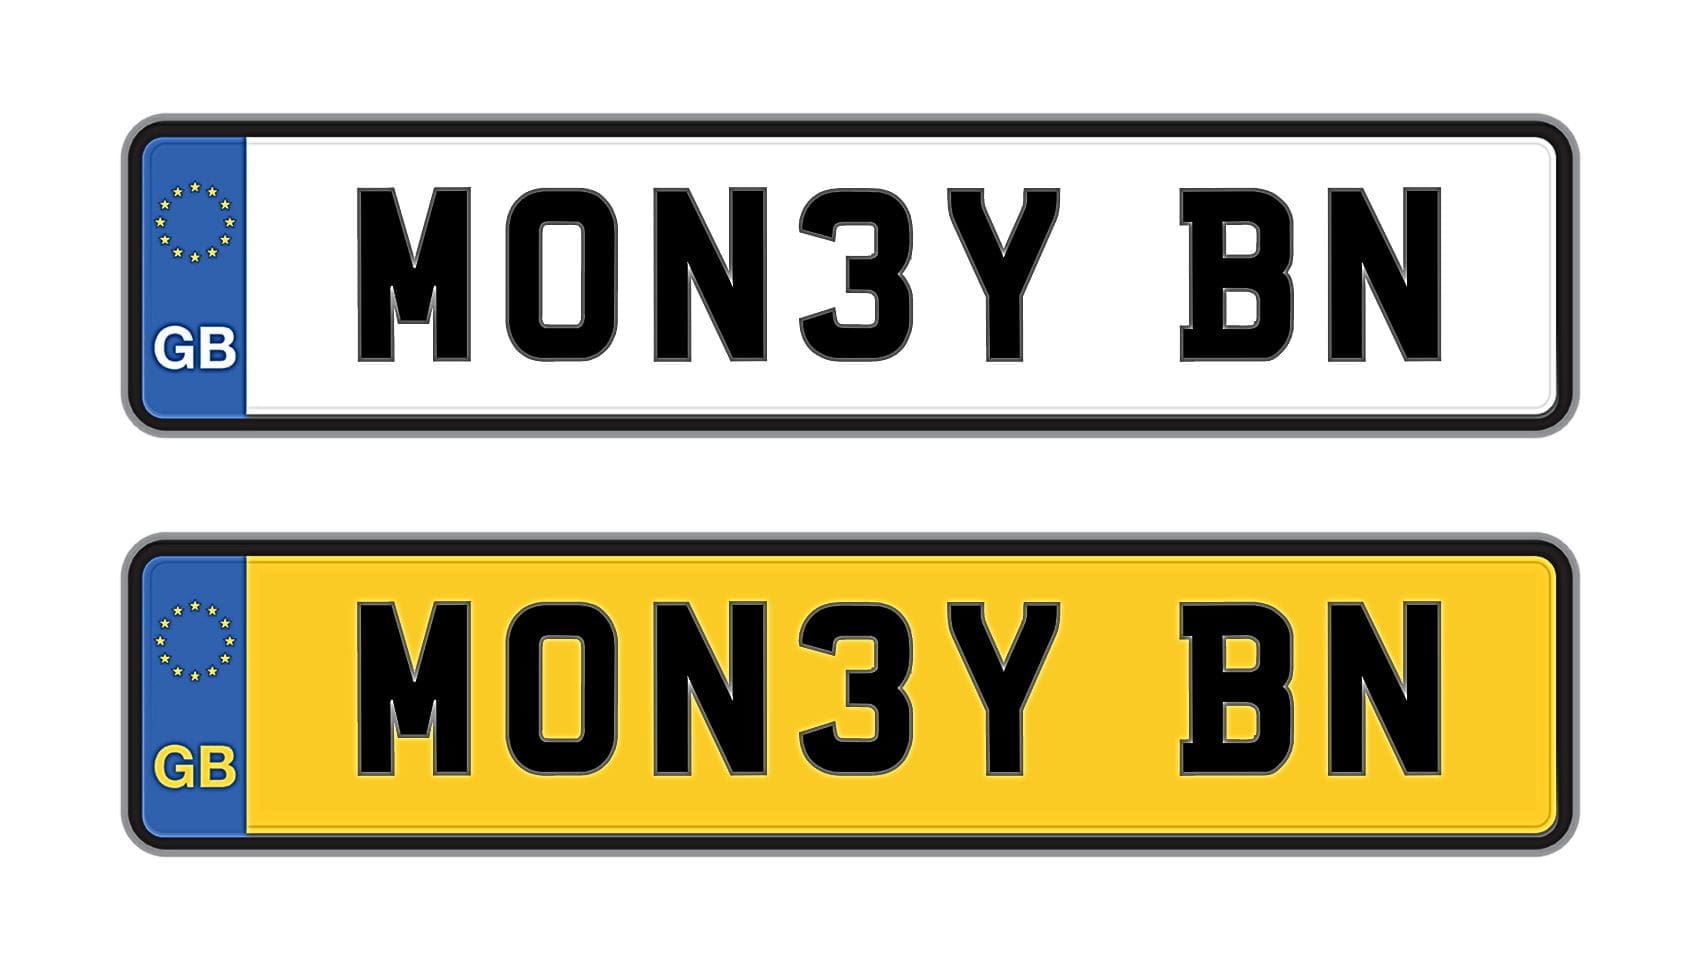 Moneybarn private number plates